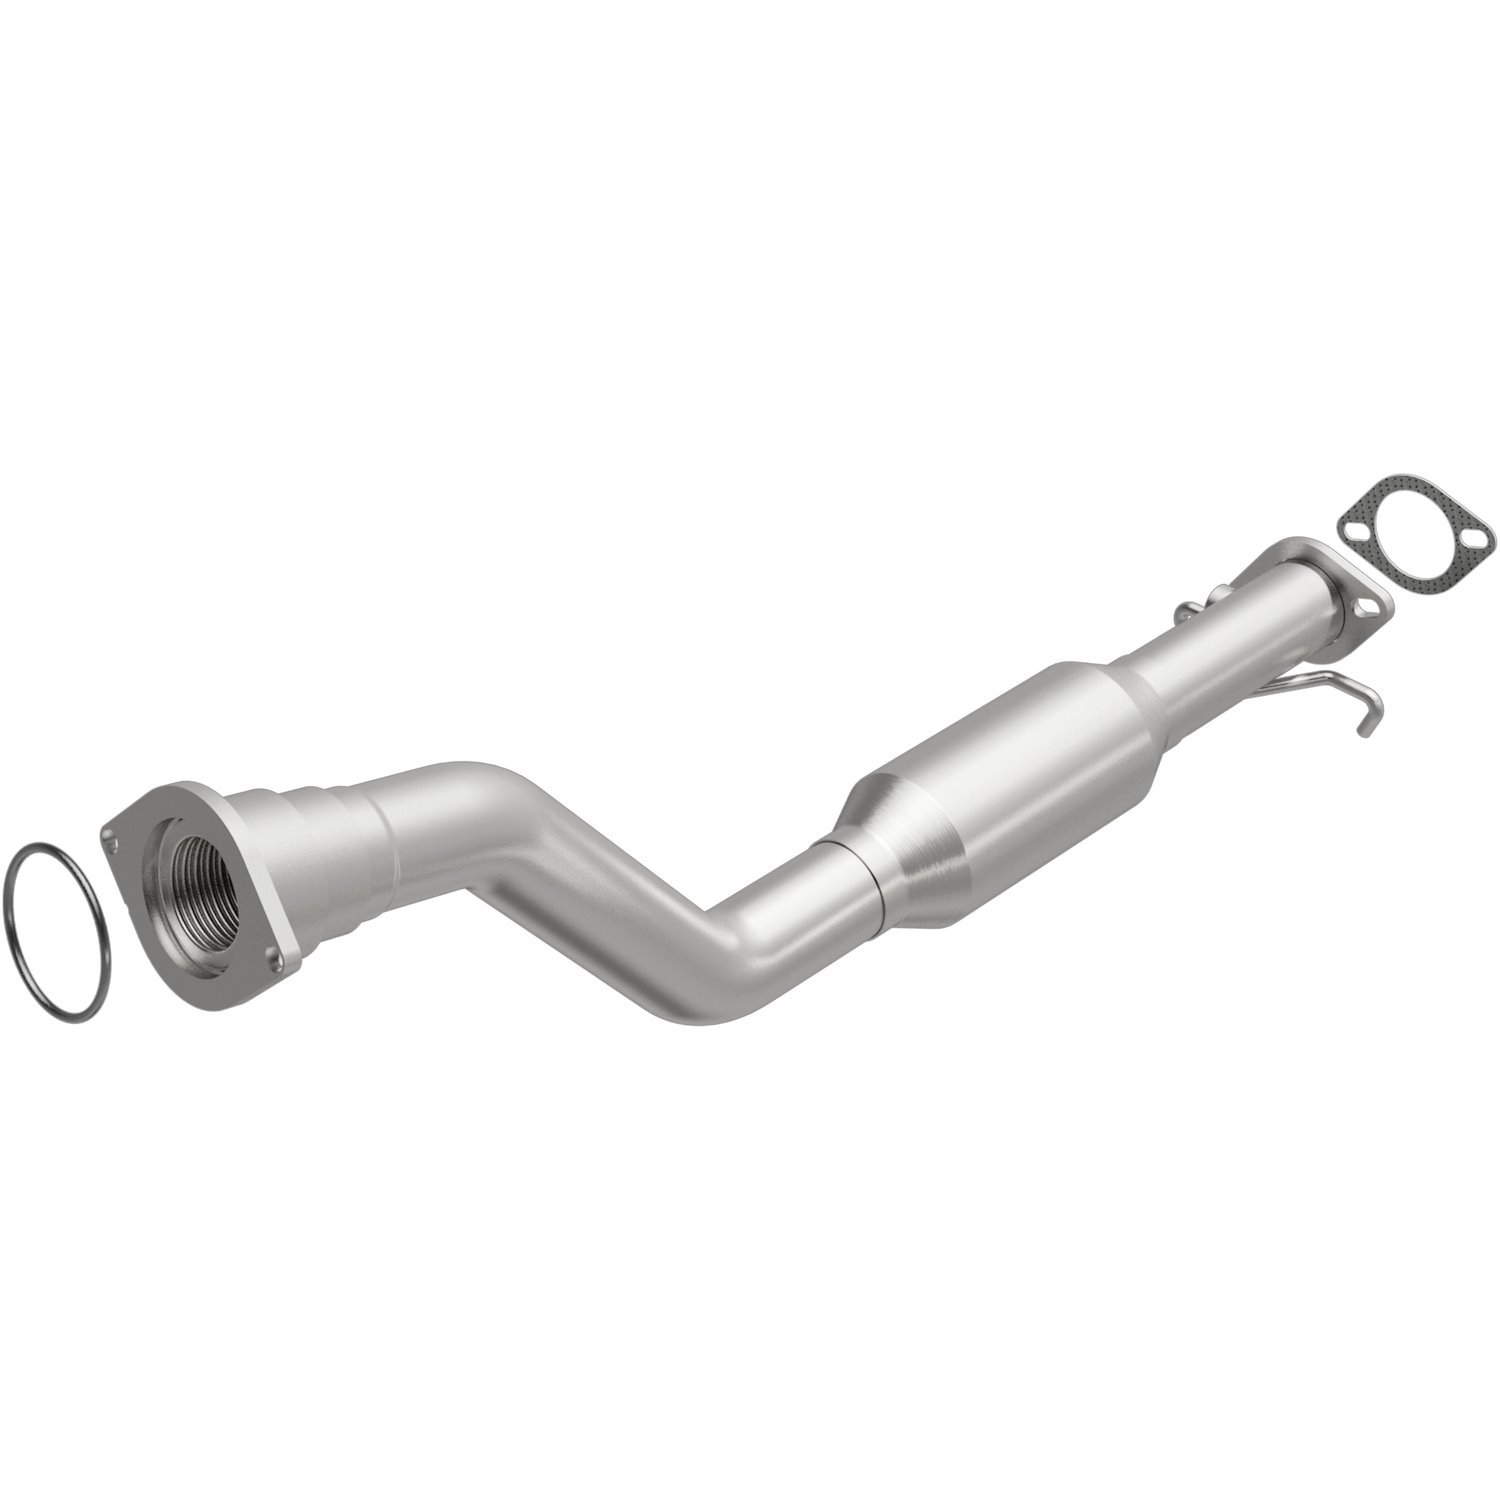 OEM Grade Federal / EPA Compliant Direct-Fit Catalytic Converter 51396